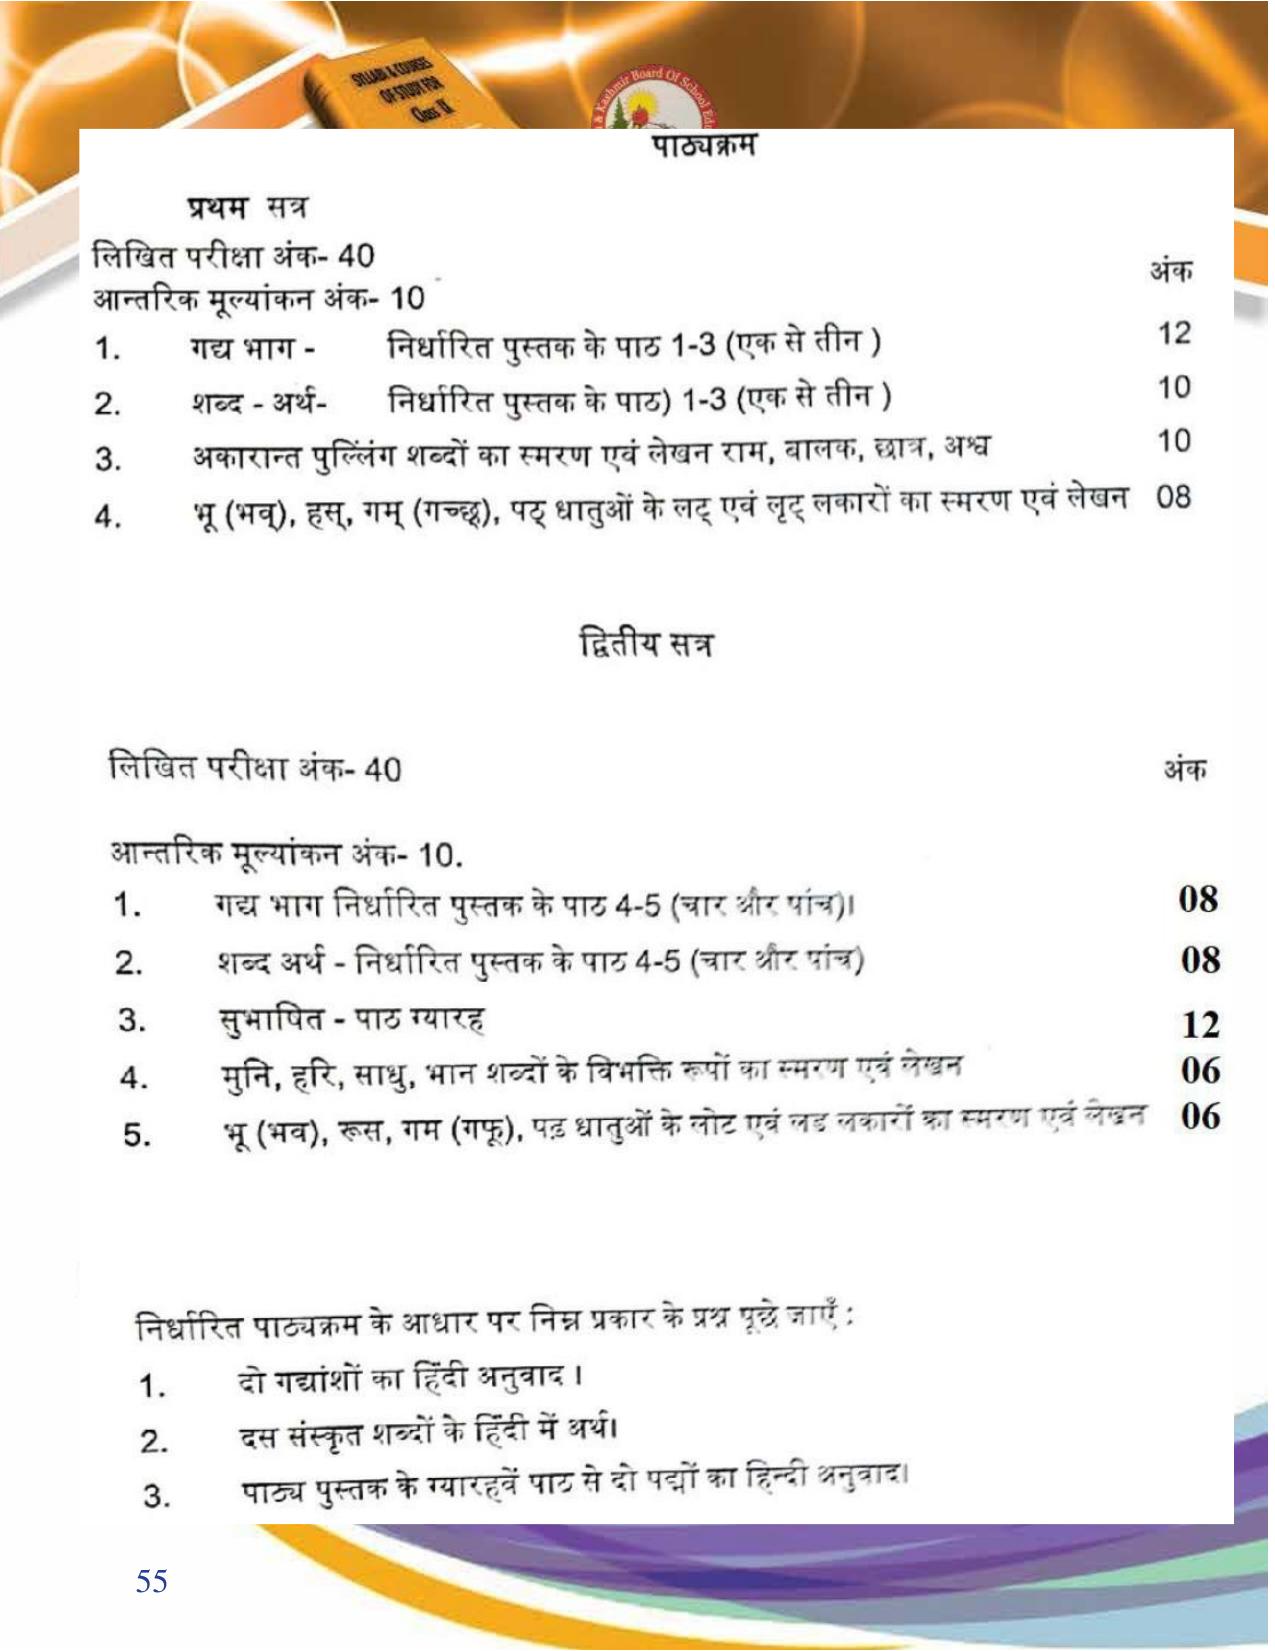 JKBOSE Syllabus for 9th class - Page 56